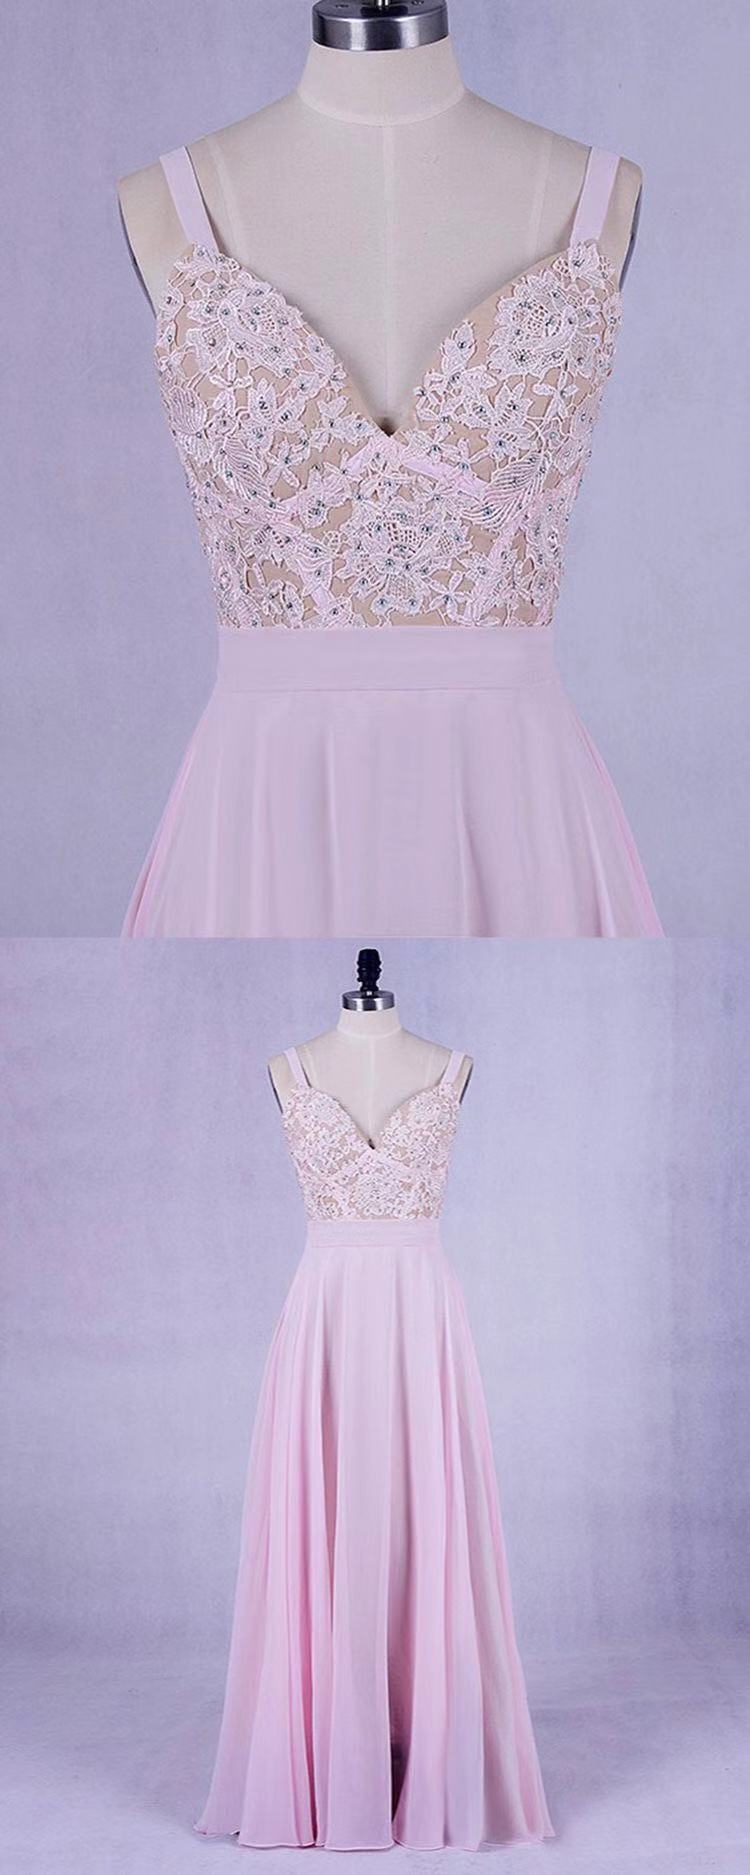 Charming Pink Chiffon Applique Sweetheart Formal Gown, Beautiful Prom Dresses 2019